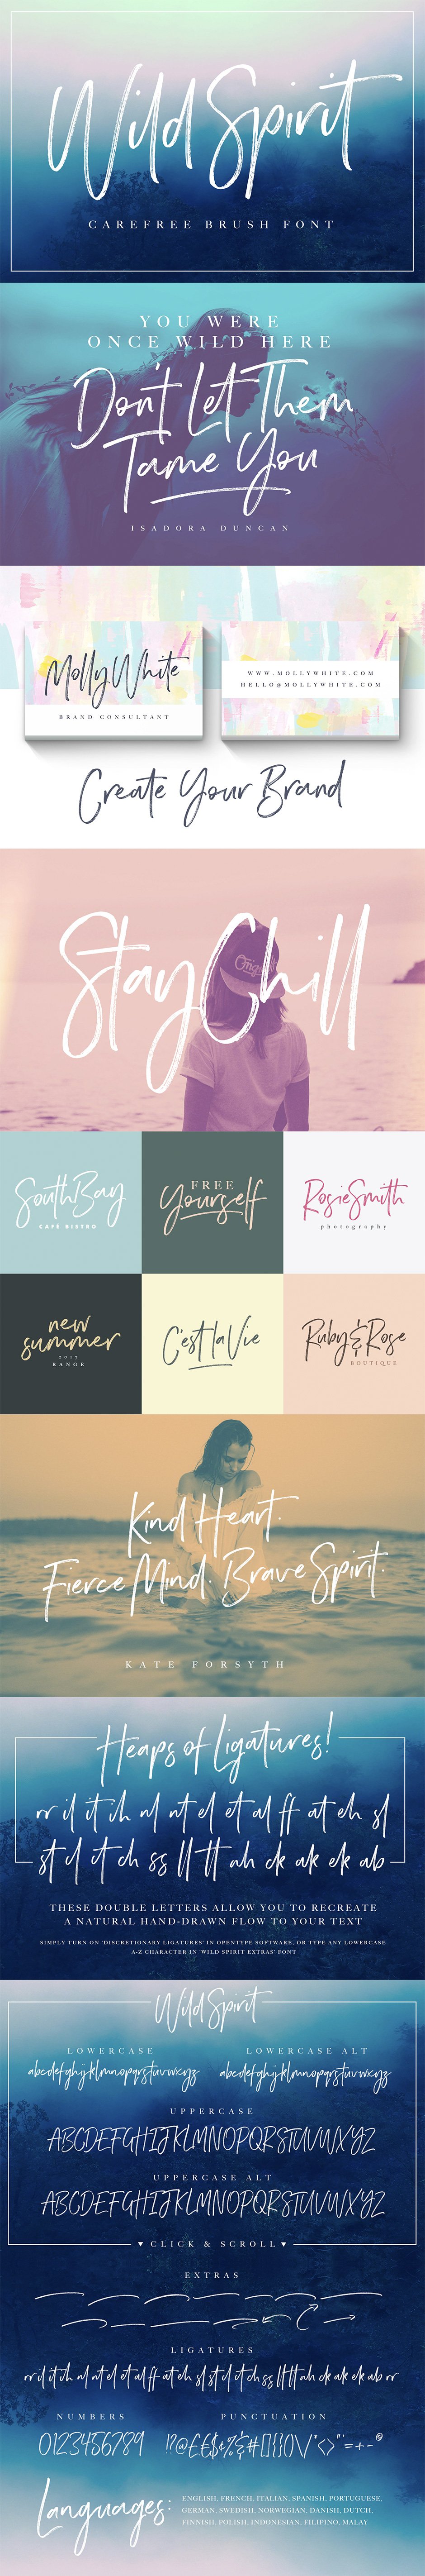 The Essential, Popular Fonts Collection